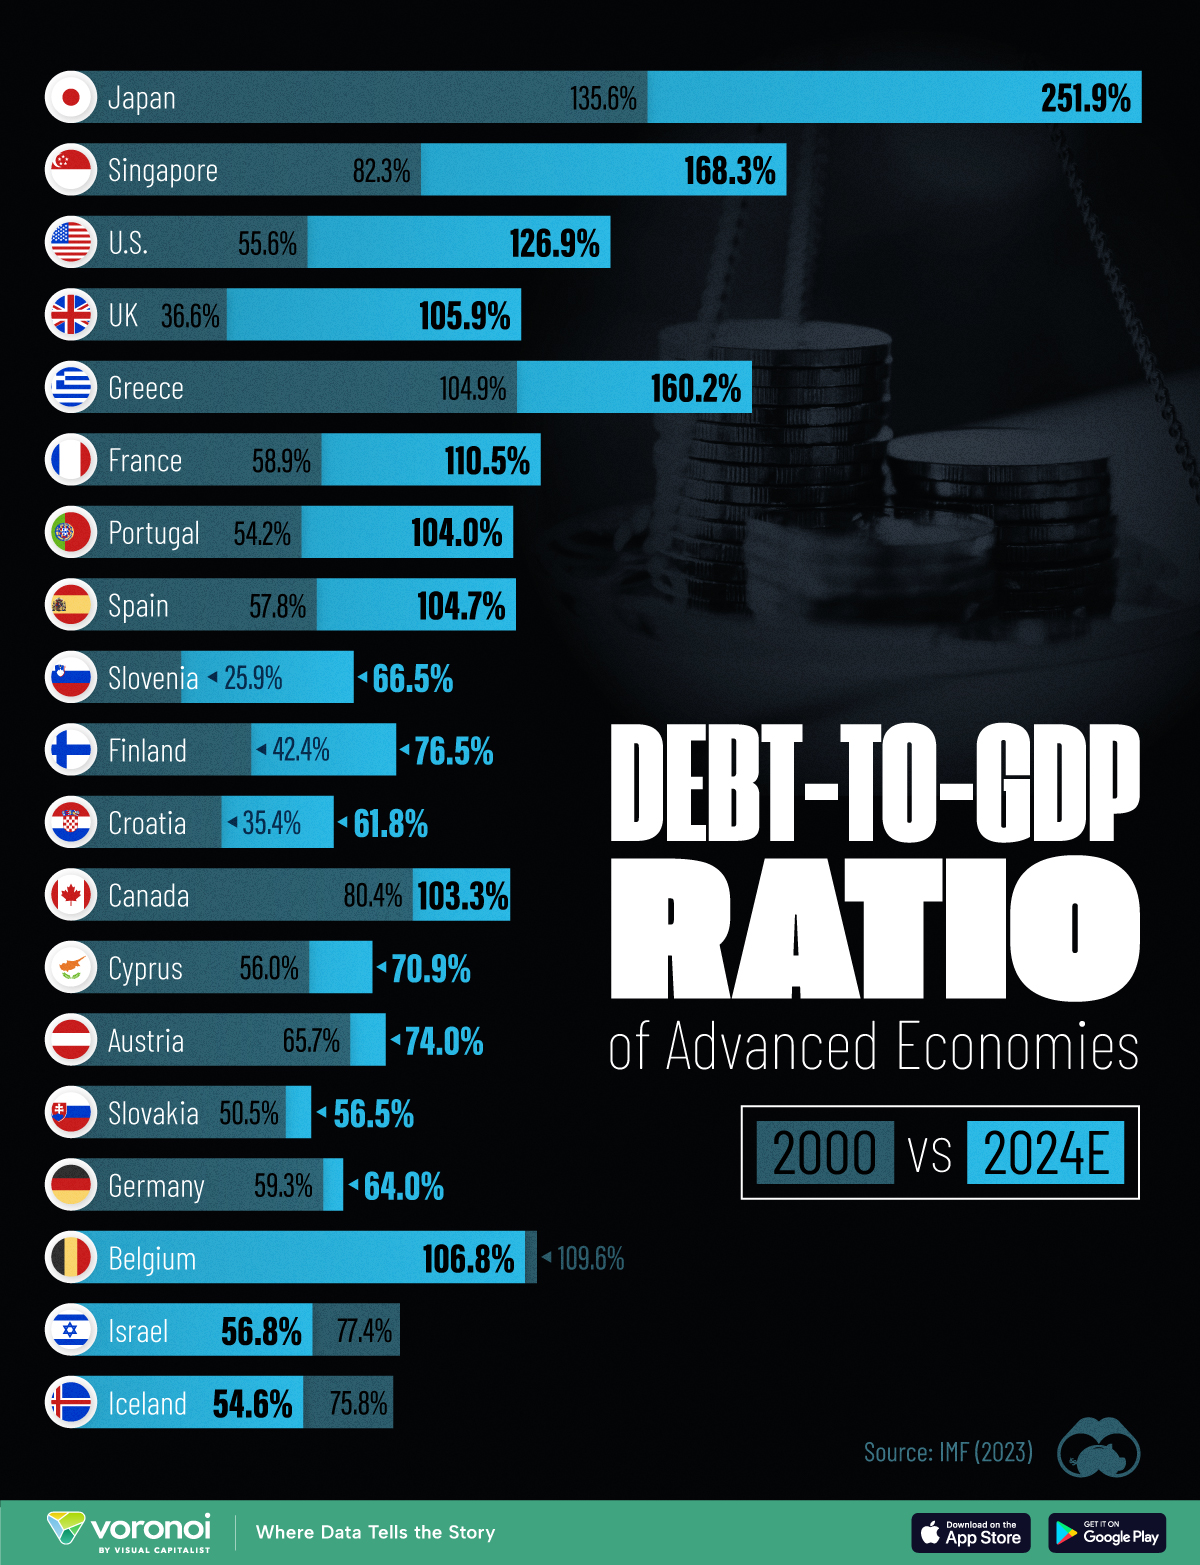 Chart comparing debt to GDP ratios from 2000 to 2024